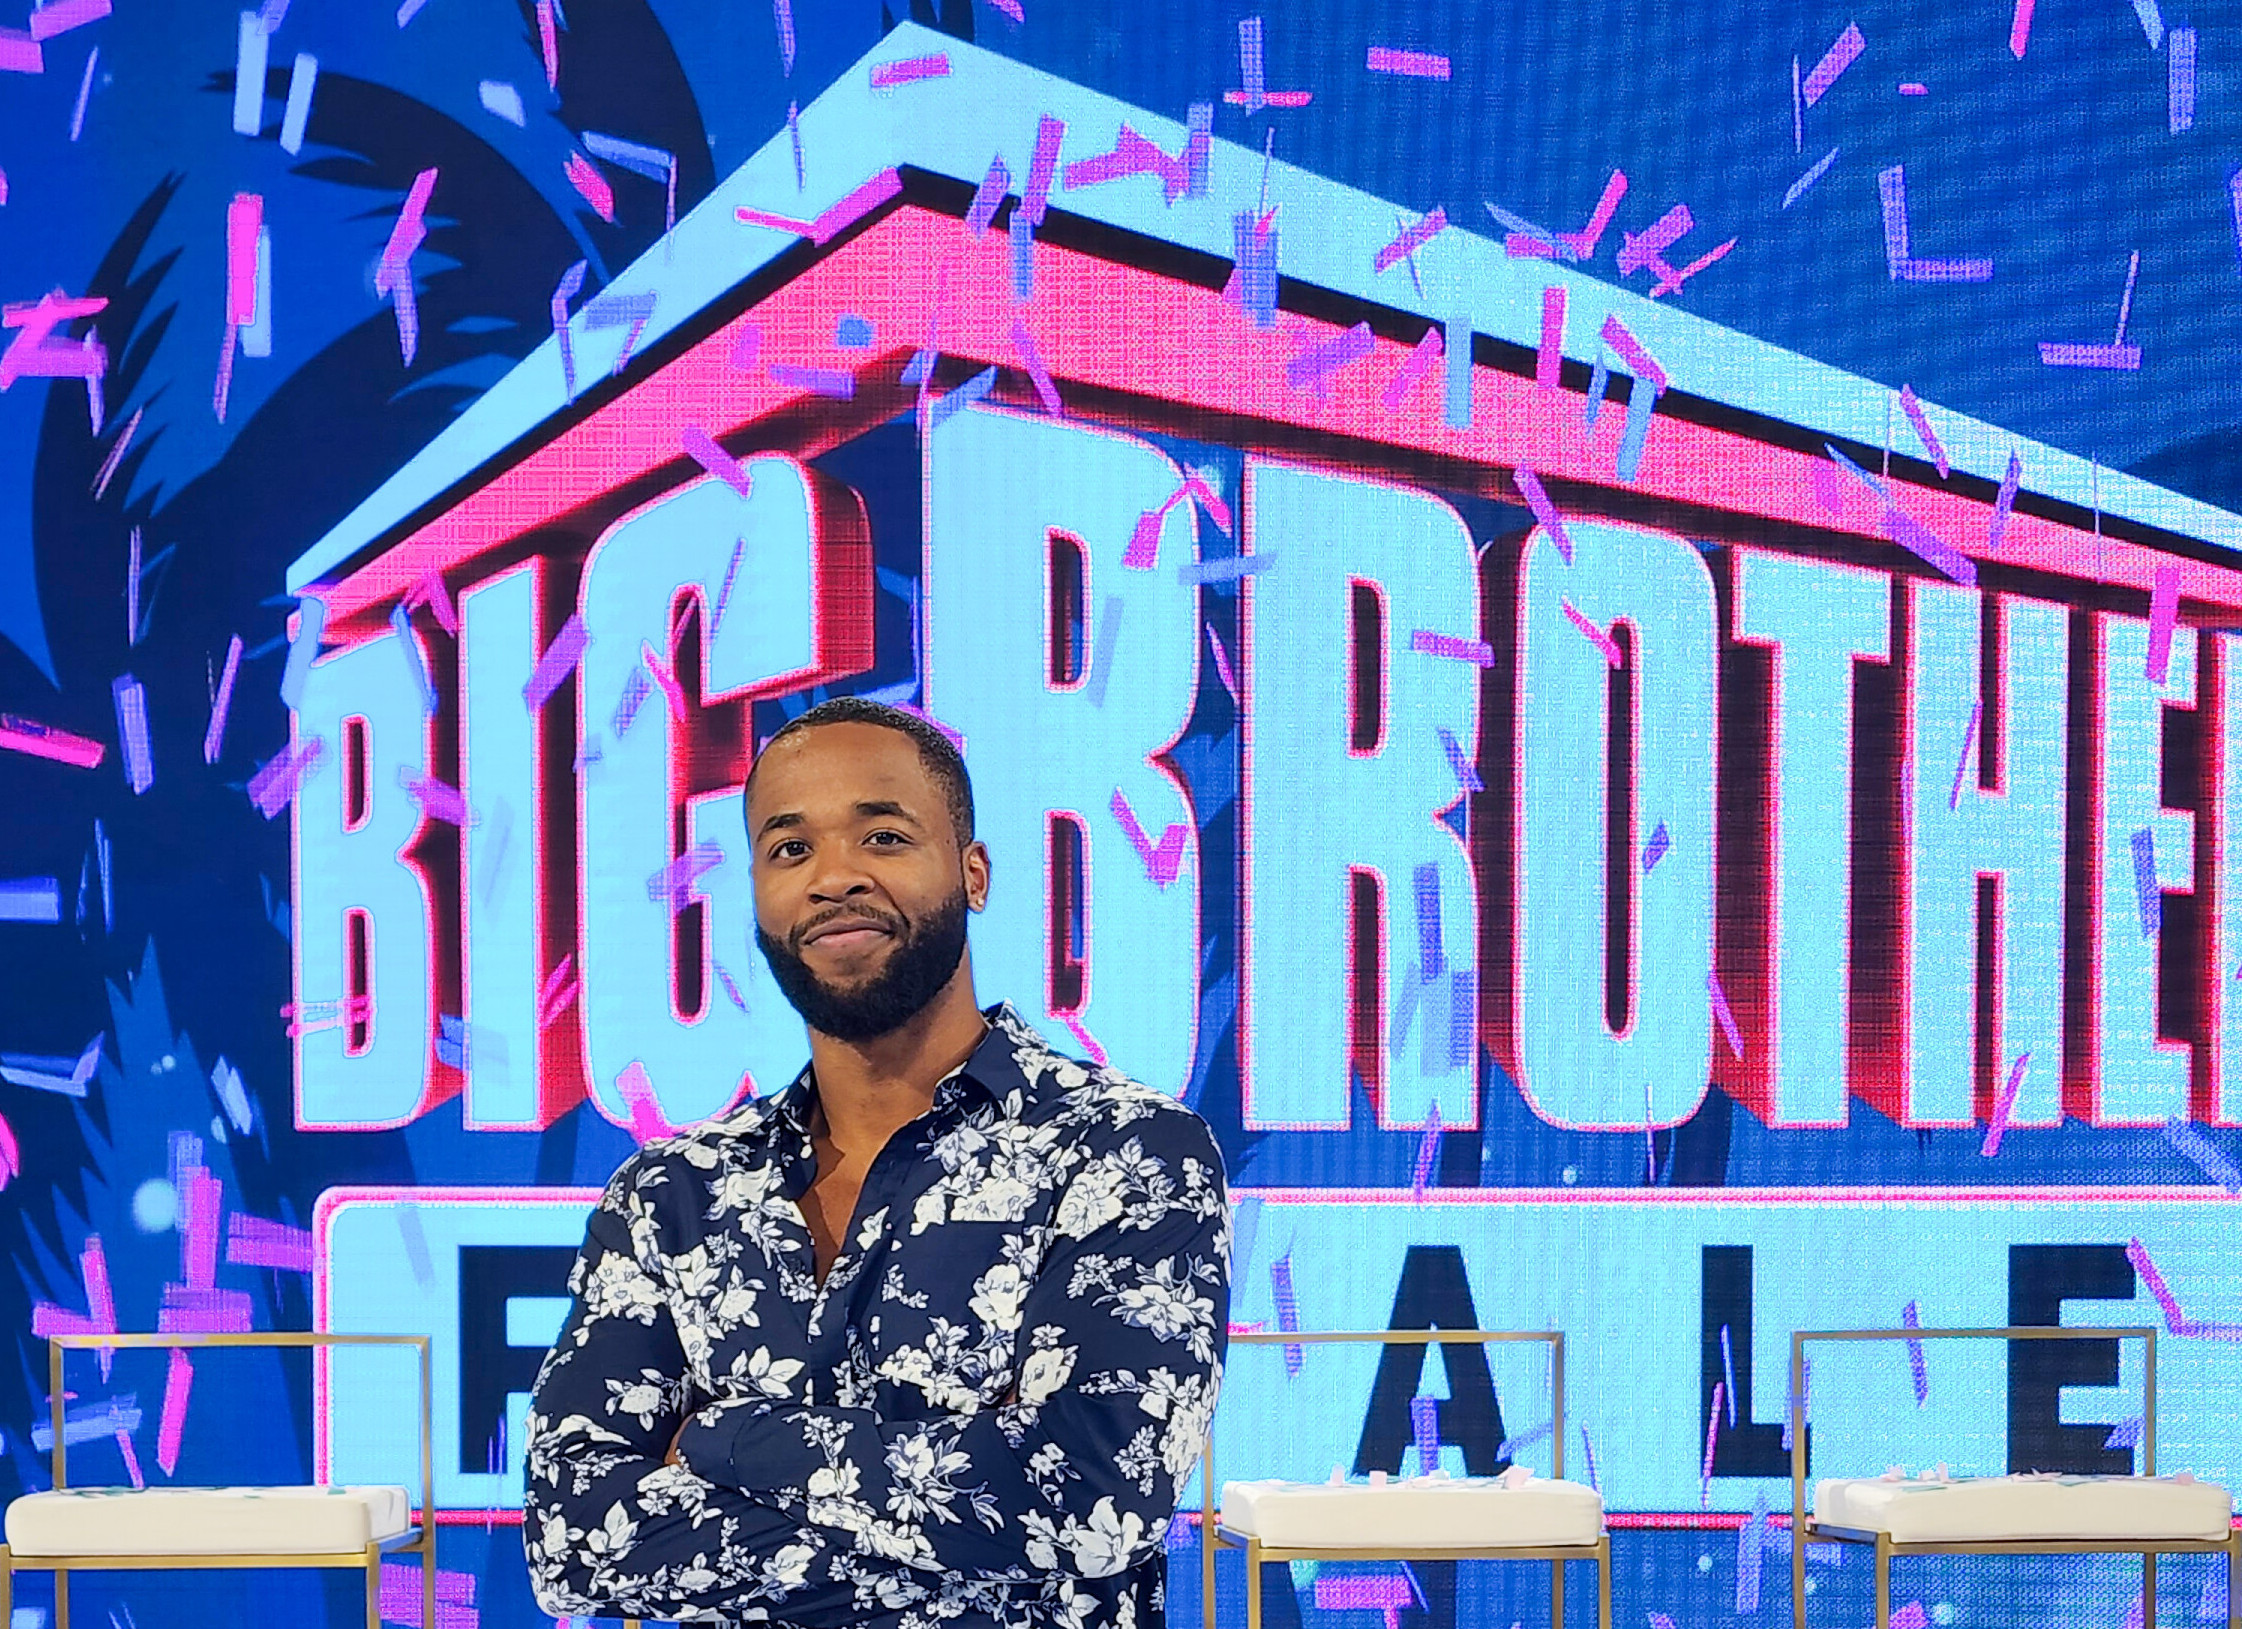 Monte Taylor poses in front of the 'Big Brother' finale screen with his arms crossed.